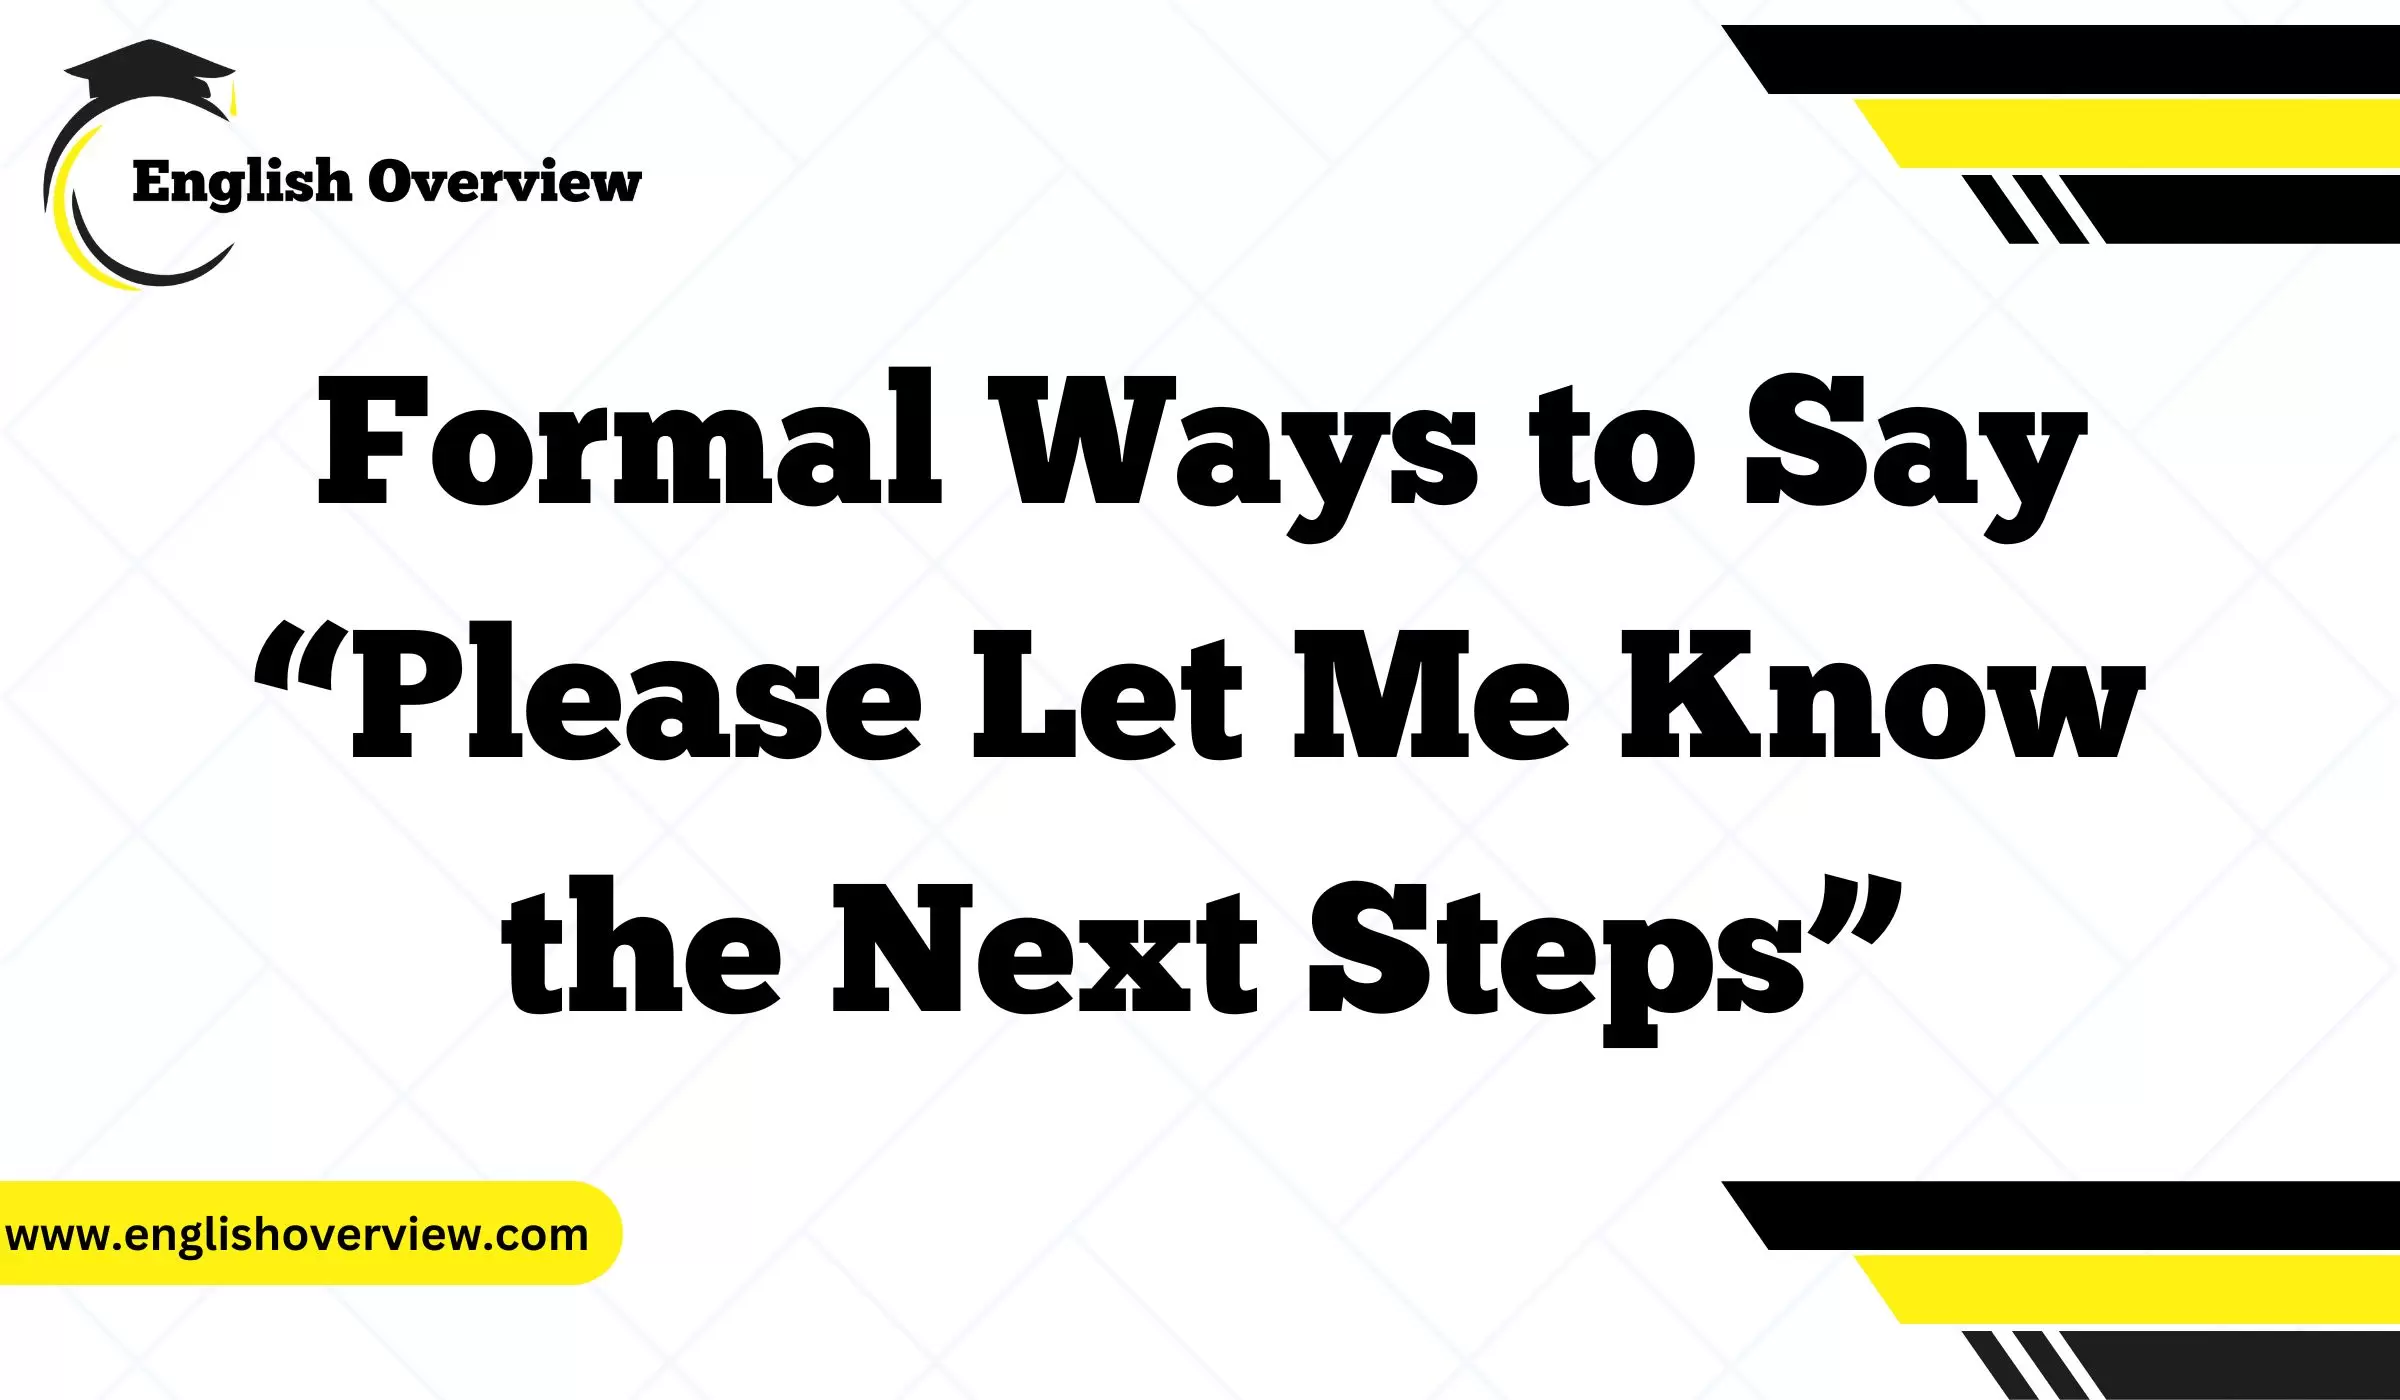 Formal Ways to Say “Please Let Me Know the Next Steps”